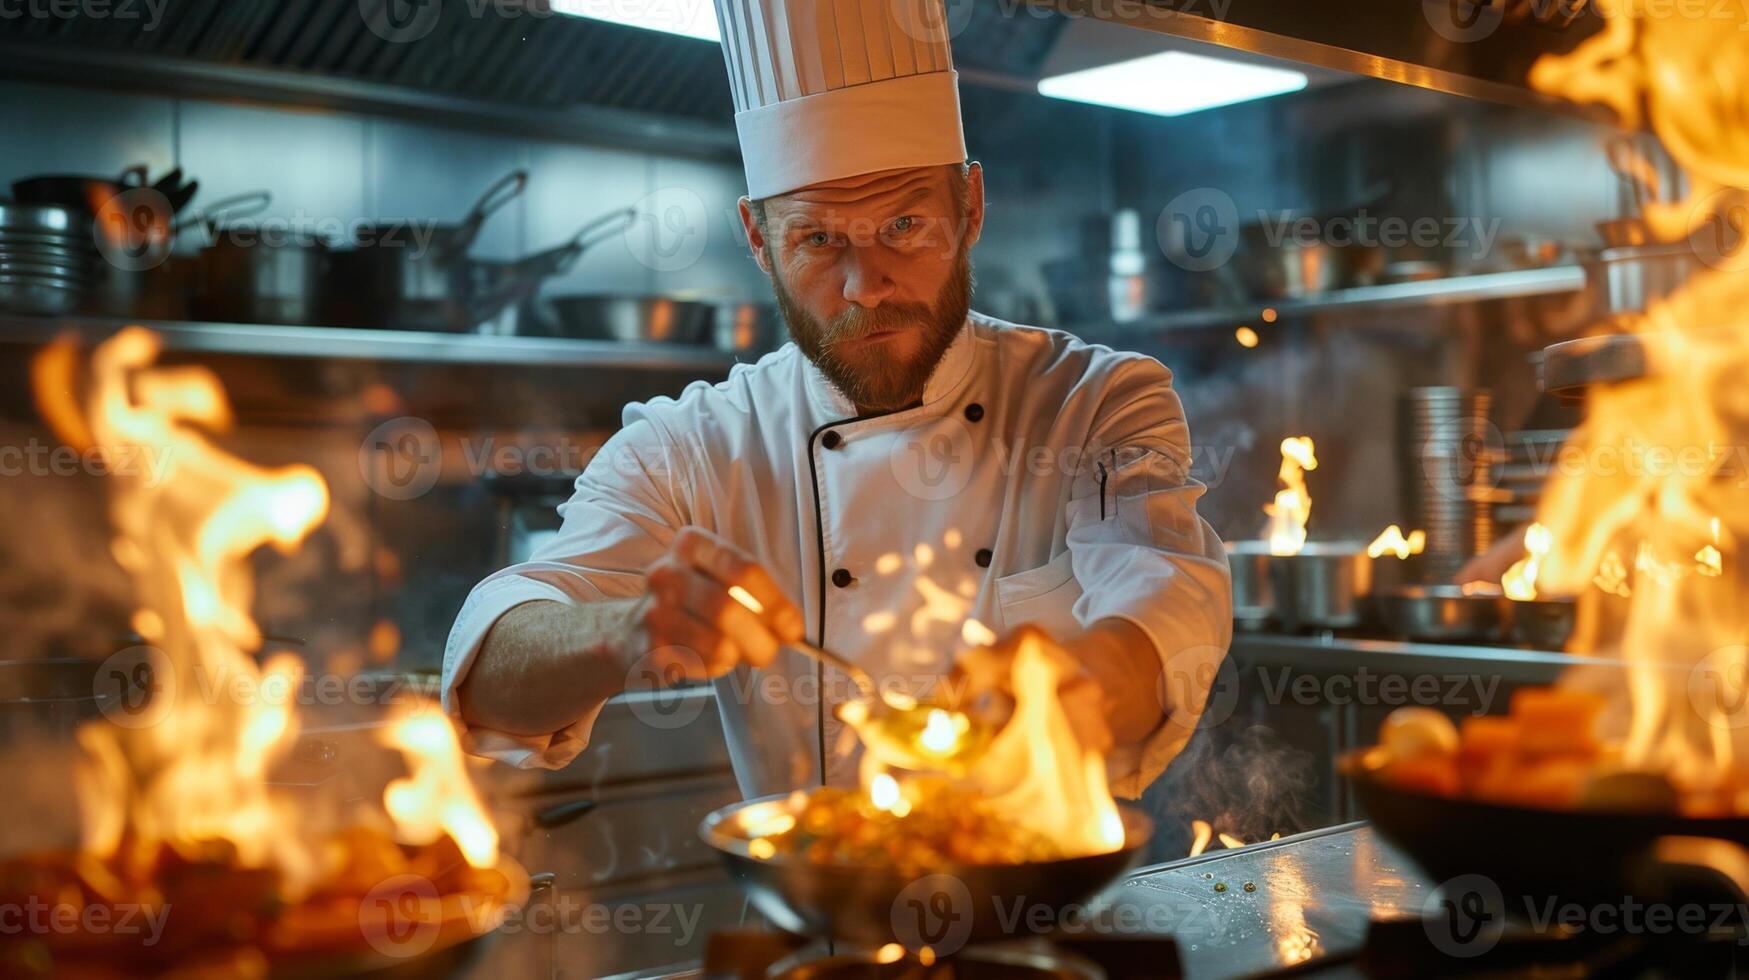 AI generated Chef tasting a sauce from a stainless steel spoon, expression of critical assessment, dynamic kitchen environment, flames from cooking stations in the background photo